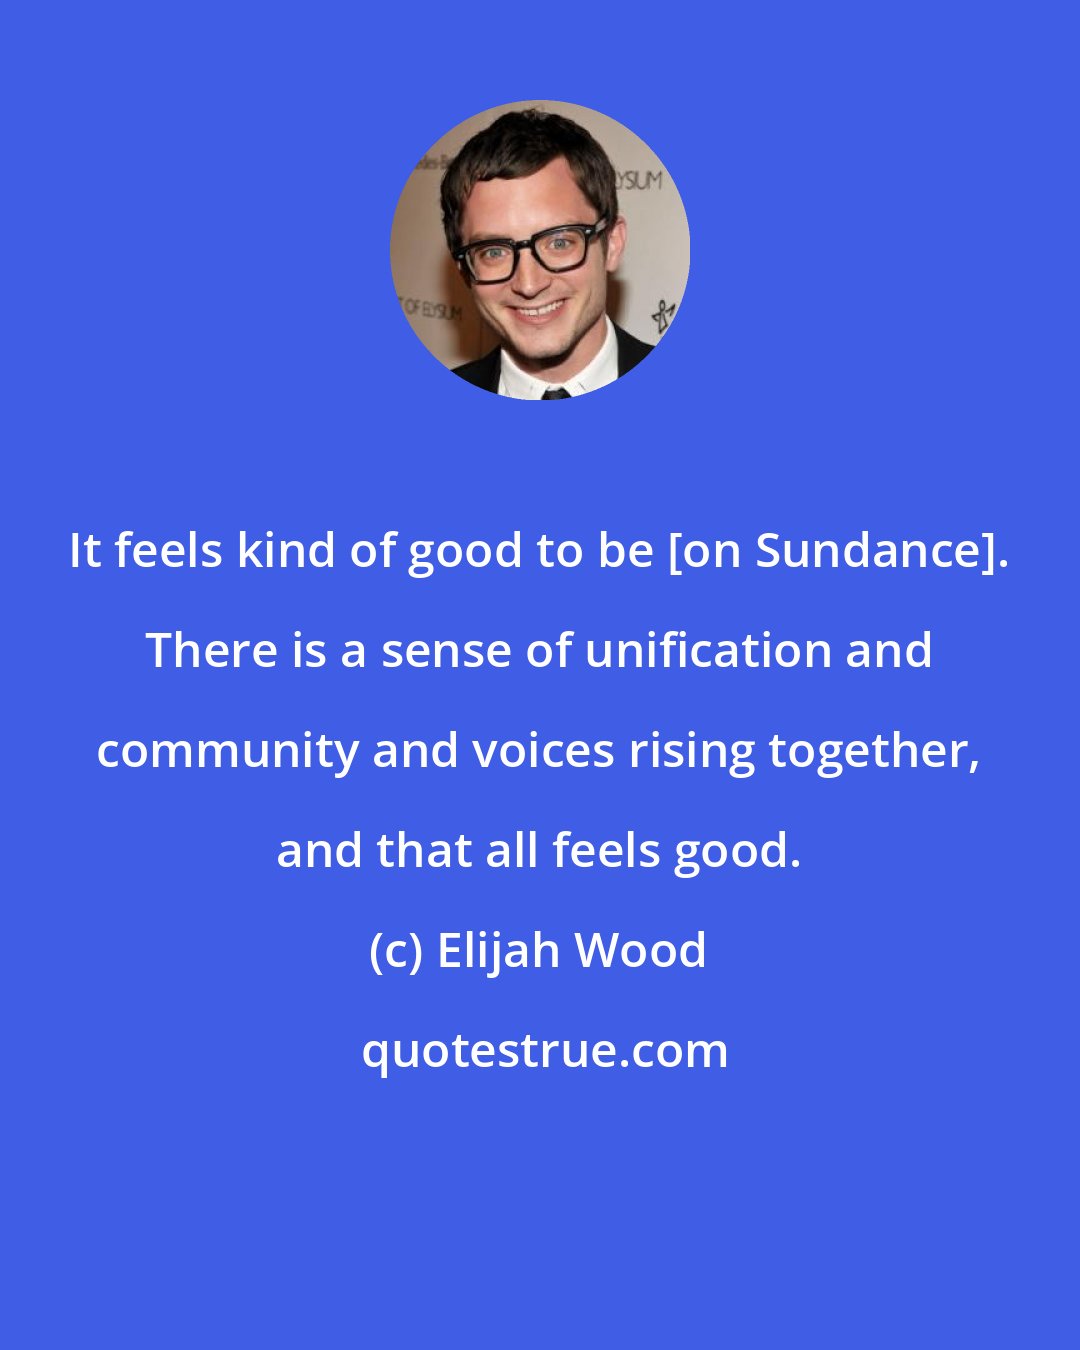 Elijah Wood: It feels kind of good to be [on Sundance]. There is a sense of unification and community and voices rising together, and that all feels good.